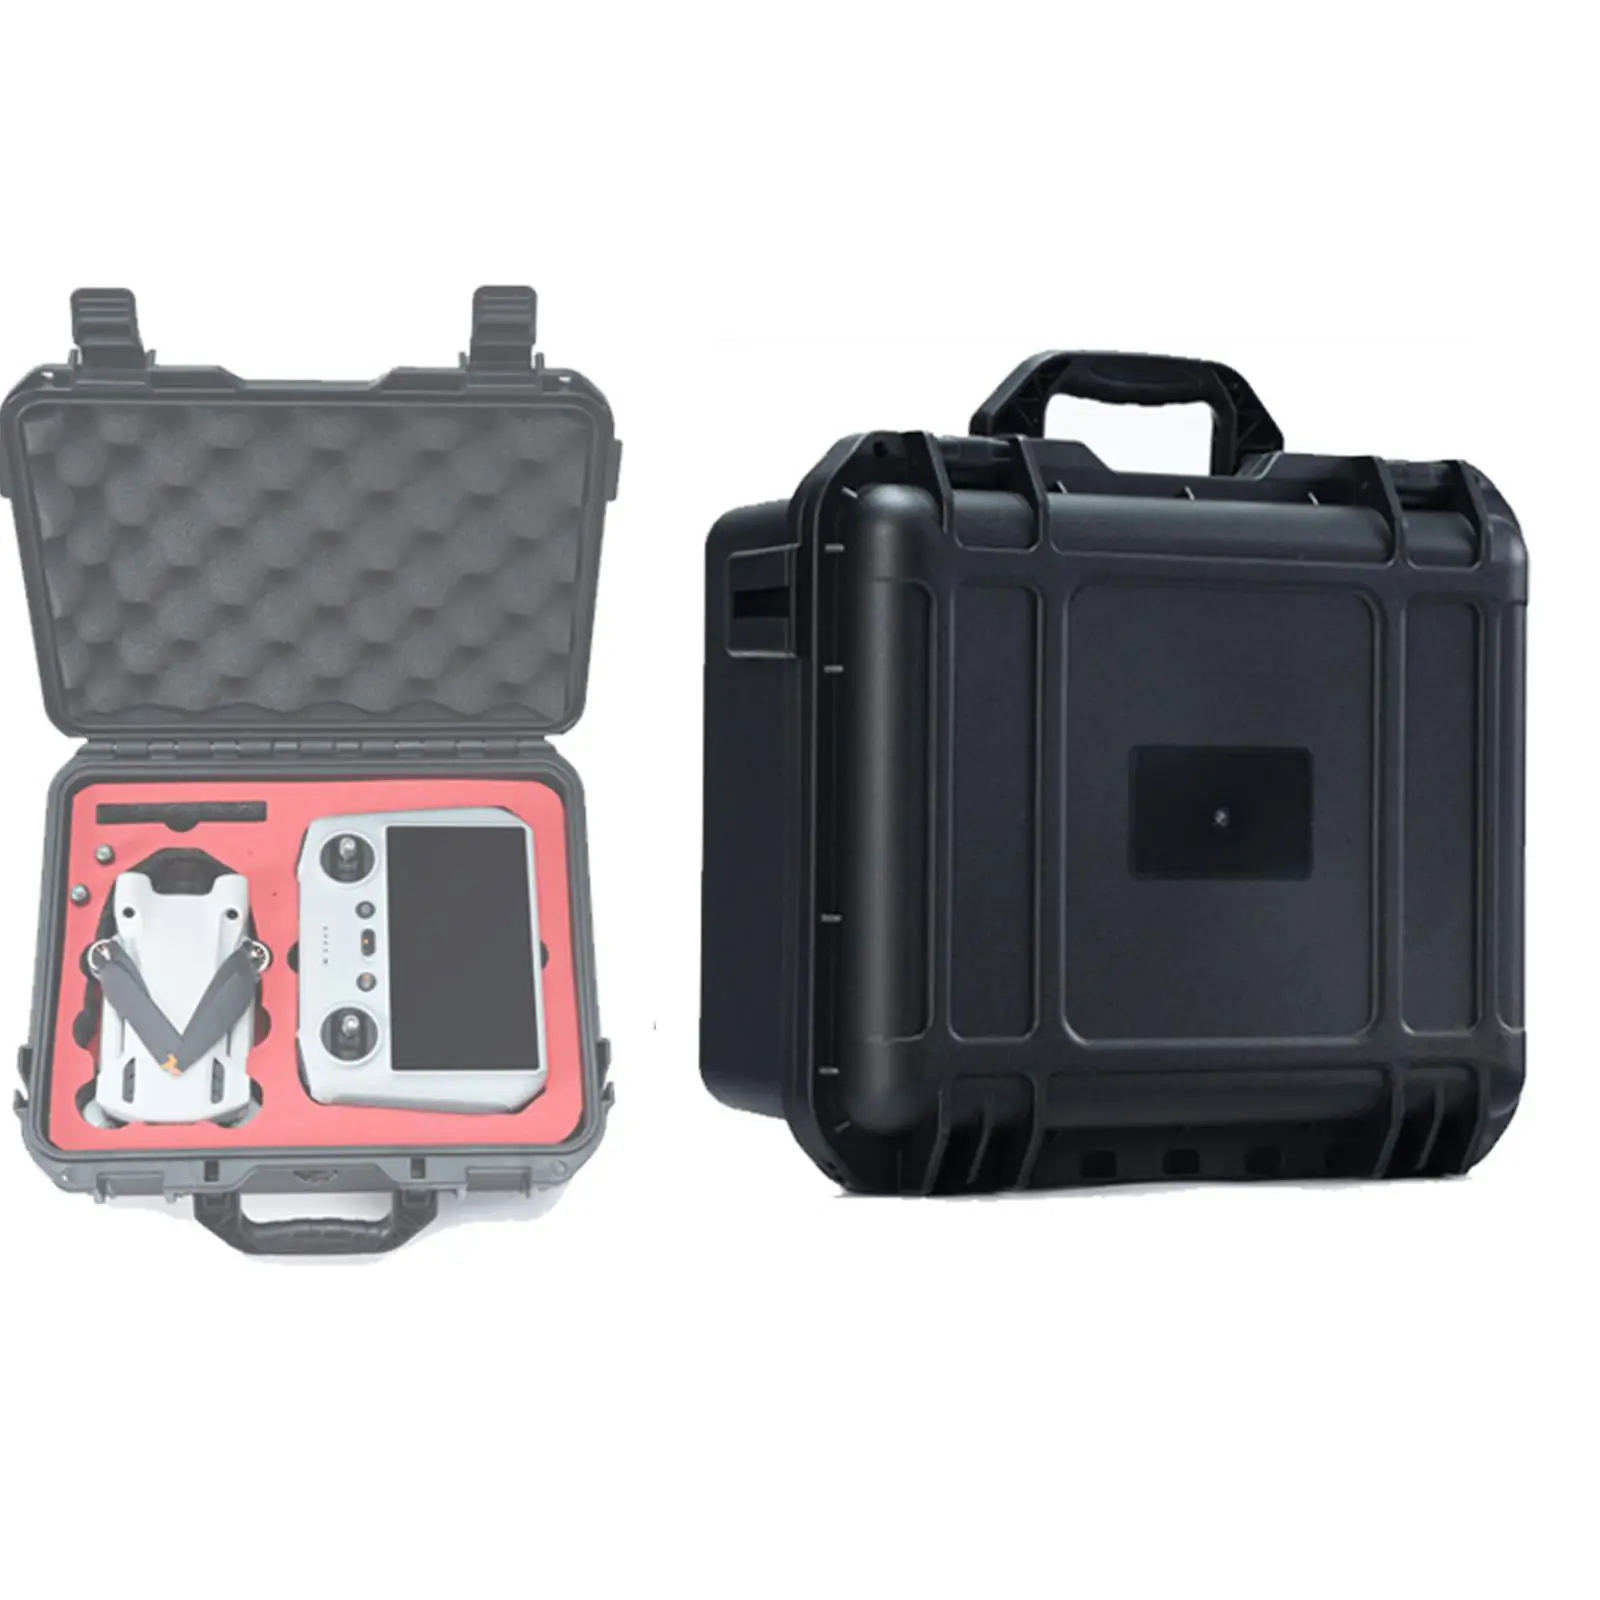 Travel Drone Carrying Case Travel Case Storage Box Suitcaseg Shockproof Storage Bag for DJI Mini 3 Pro Protector Parts